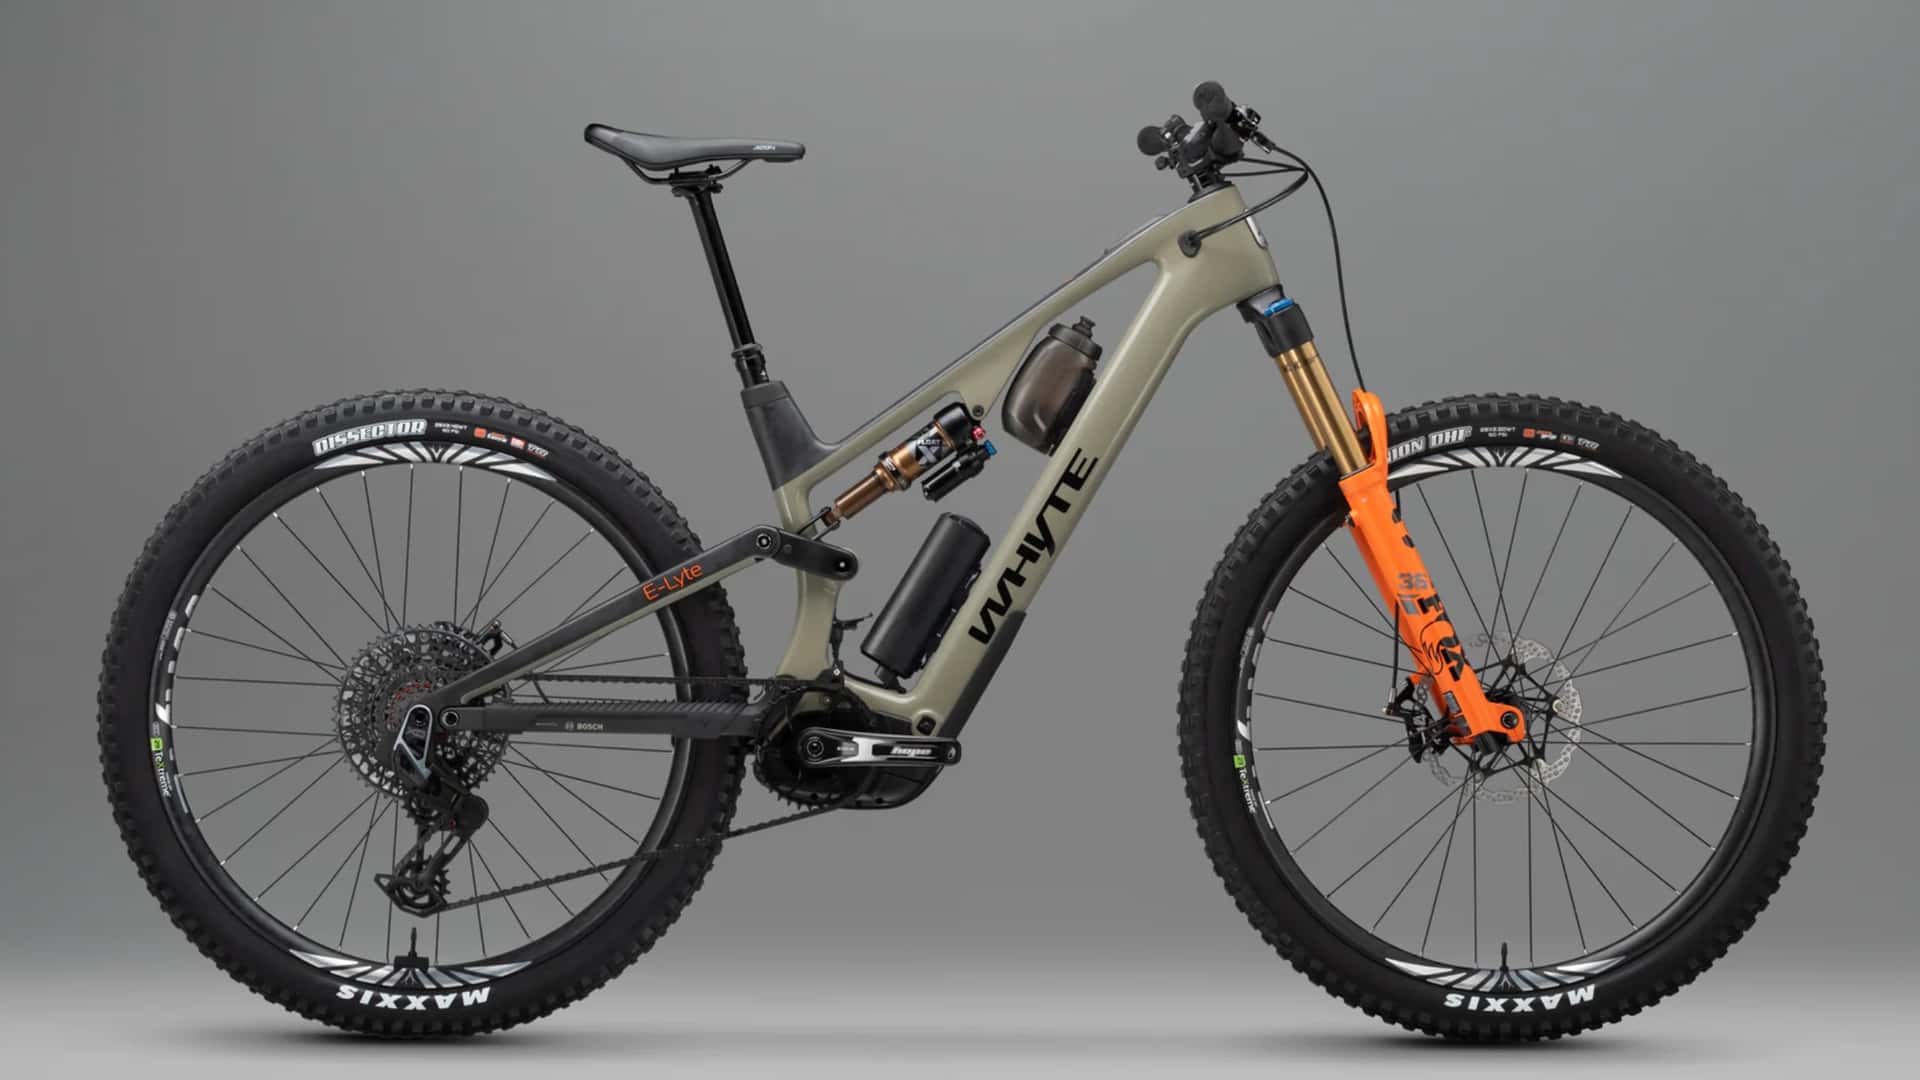 british mtb specialist whyte bikes unveils flagship e lyte e mtb - Whyte Bikes Launches Lightweight E-Lyte E-MTB to Navigate Growing Electric Mountain Bike Trend